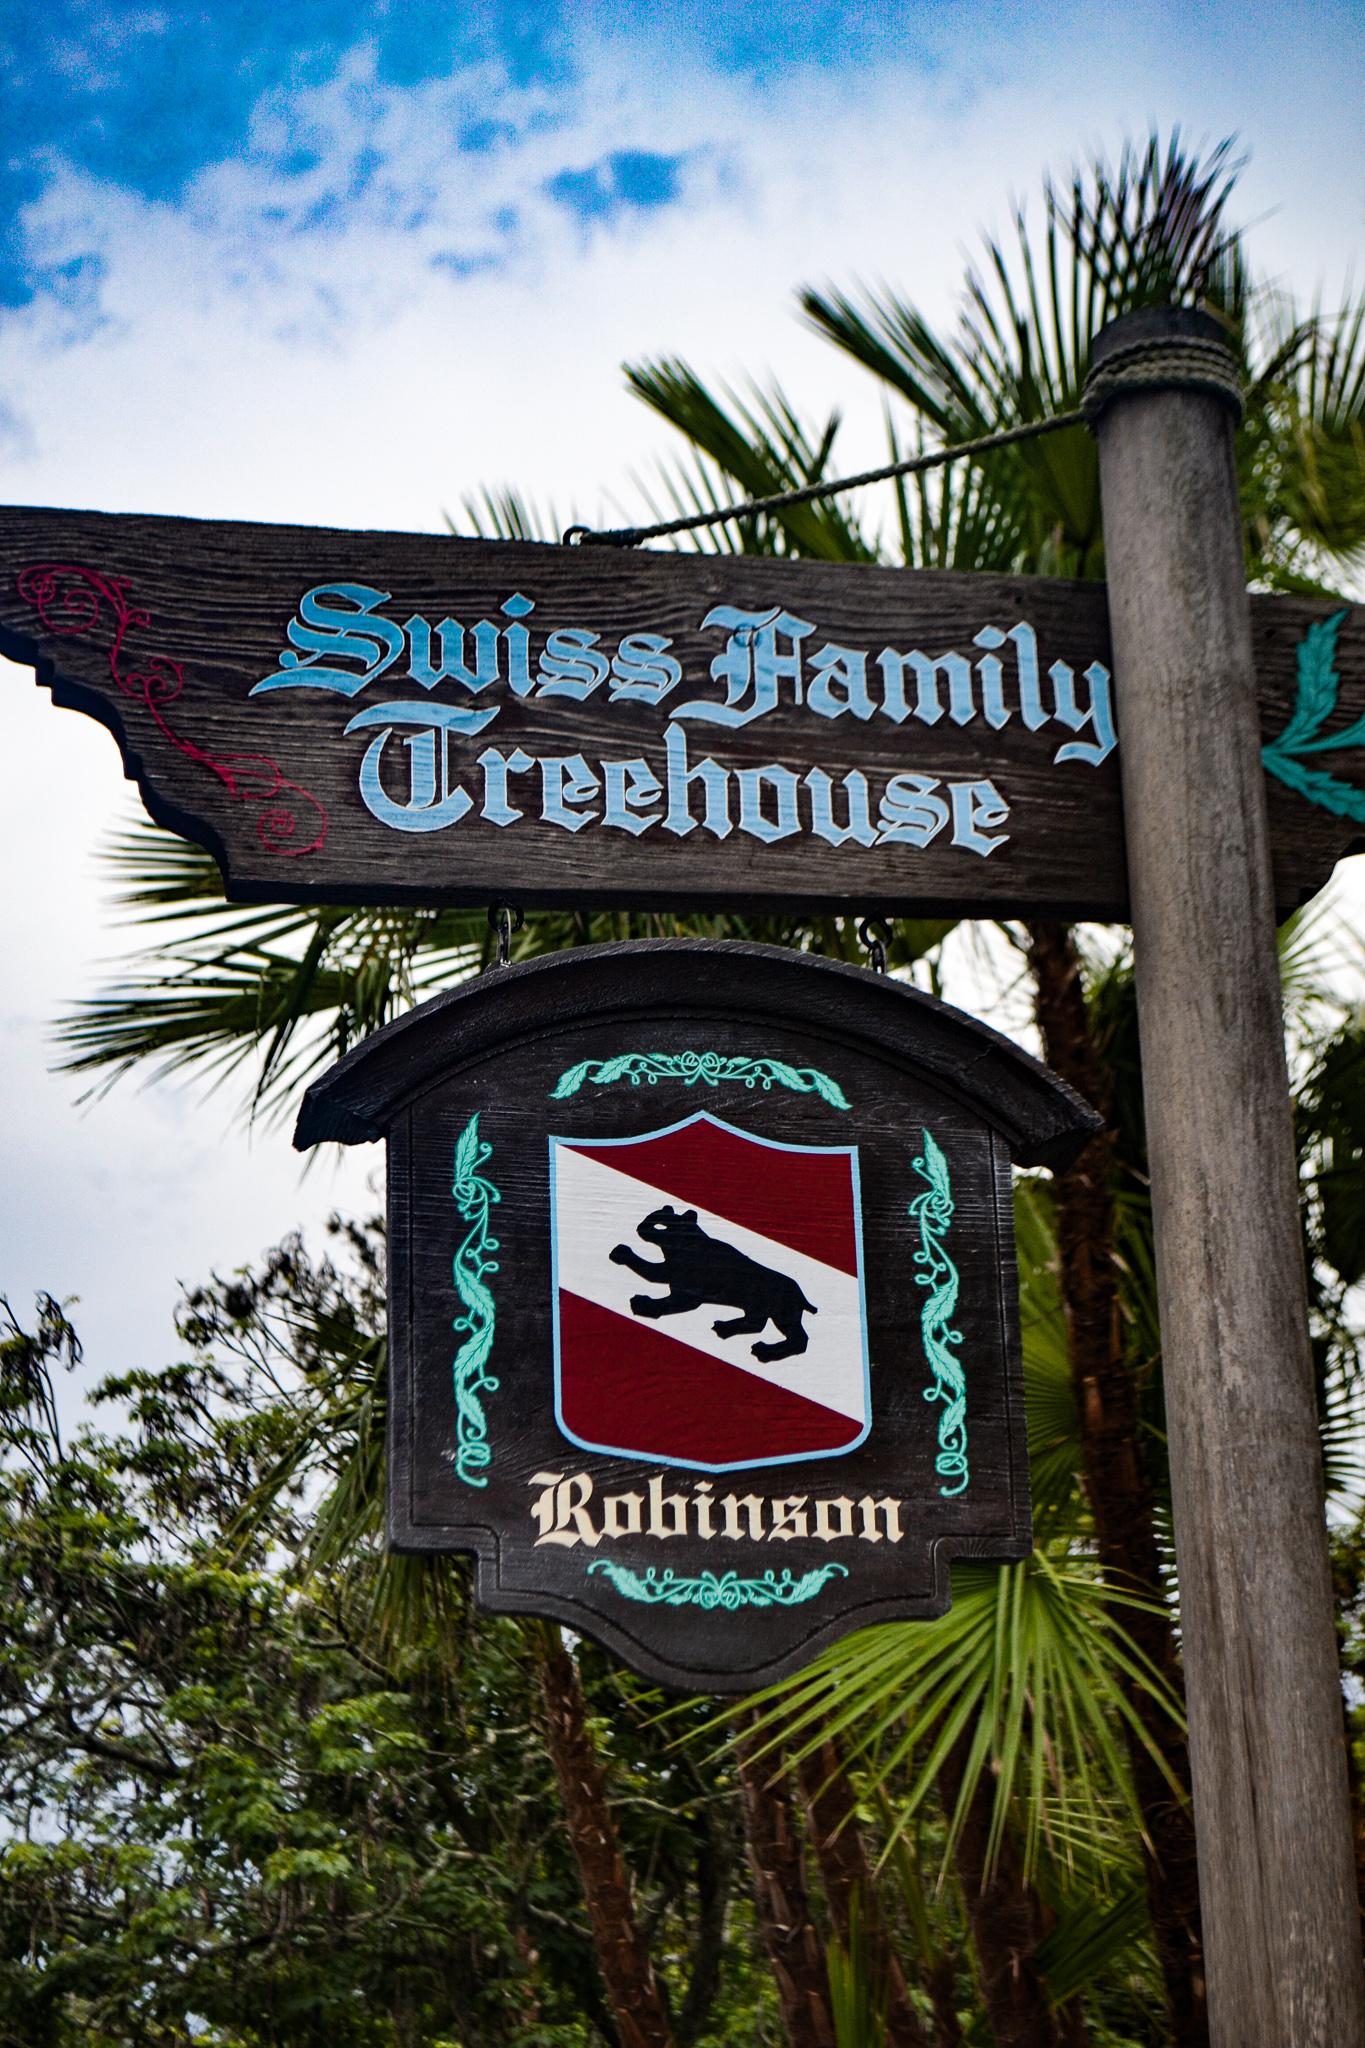 Entrance sign to Swiss Family Treehouse in Walt Disney World